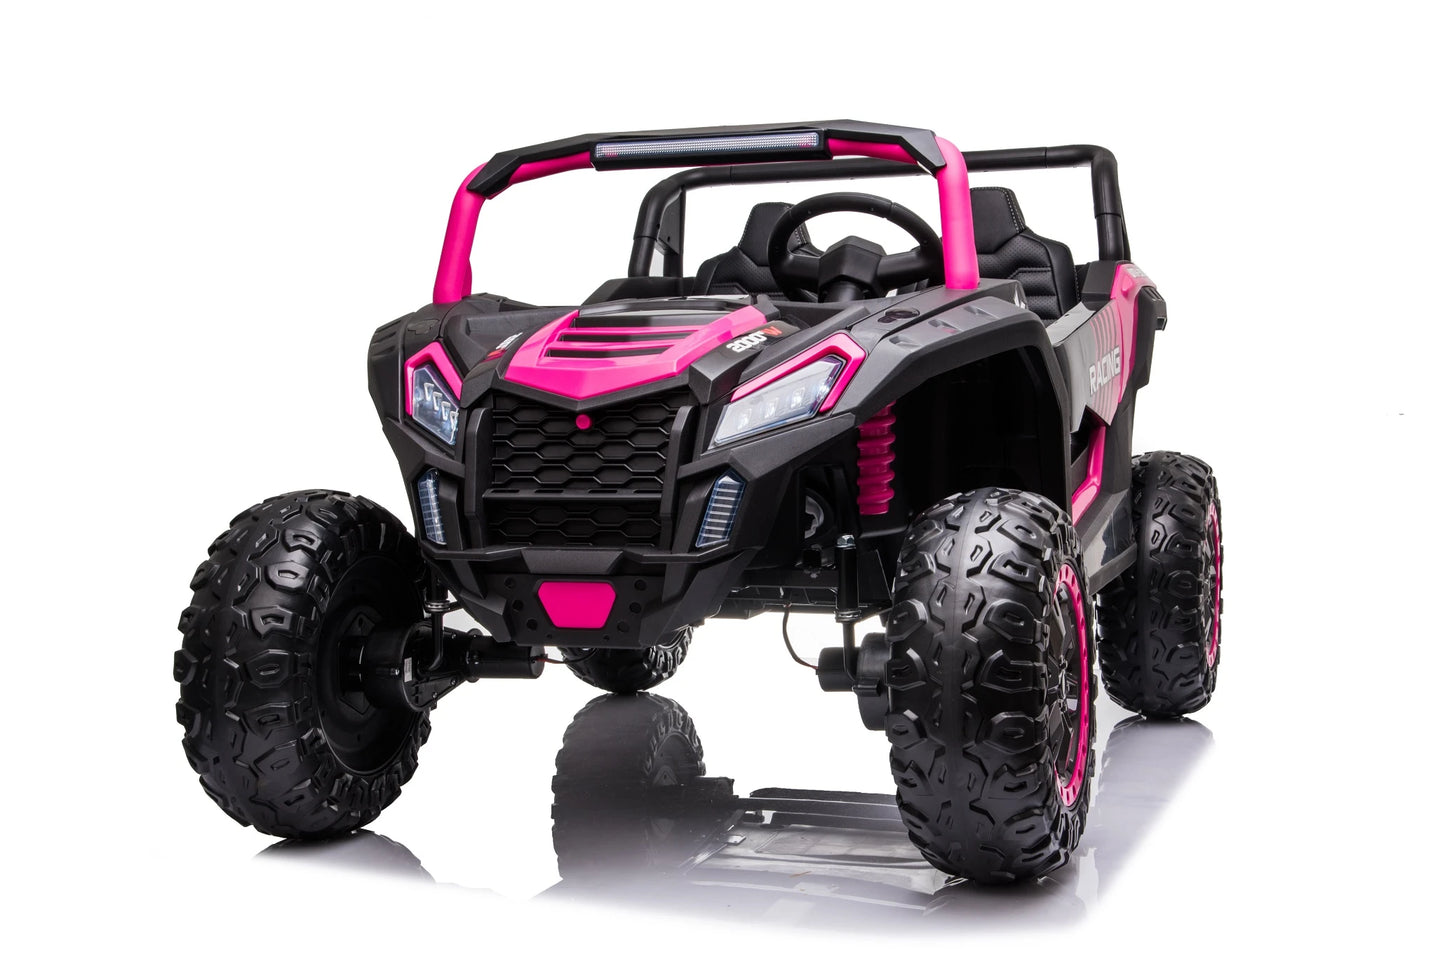 Kids ATV Large 24v Electric Ride-on Buggy with MP4 TV - PINK